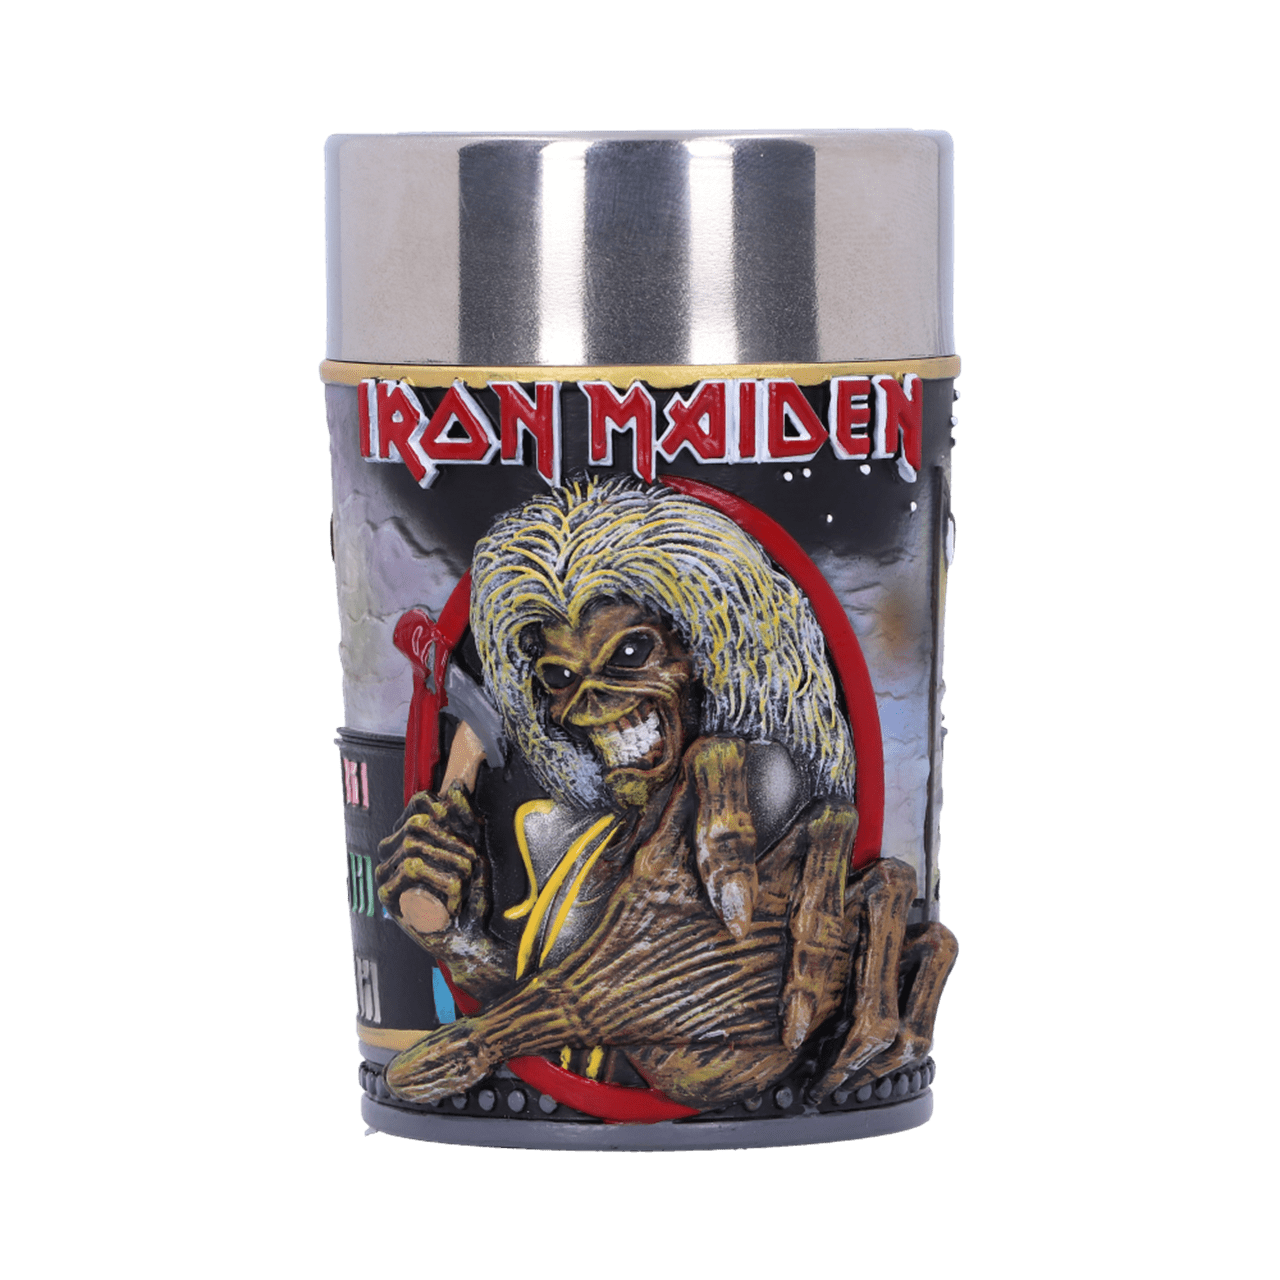 Iron Maiden - Shot Glass (Killers - high quality resin cast w. removable stainless steel insert)